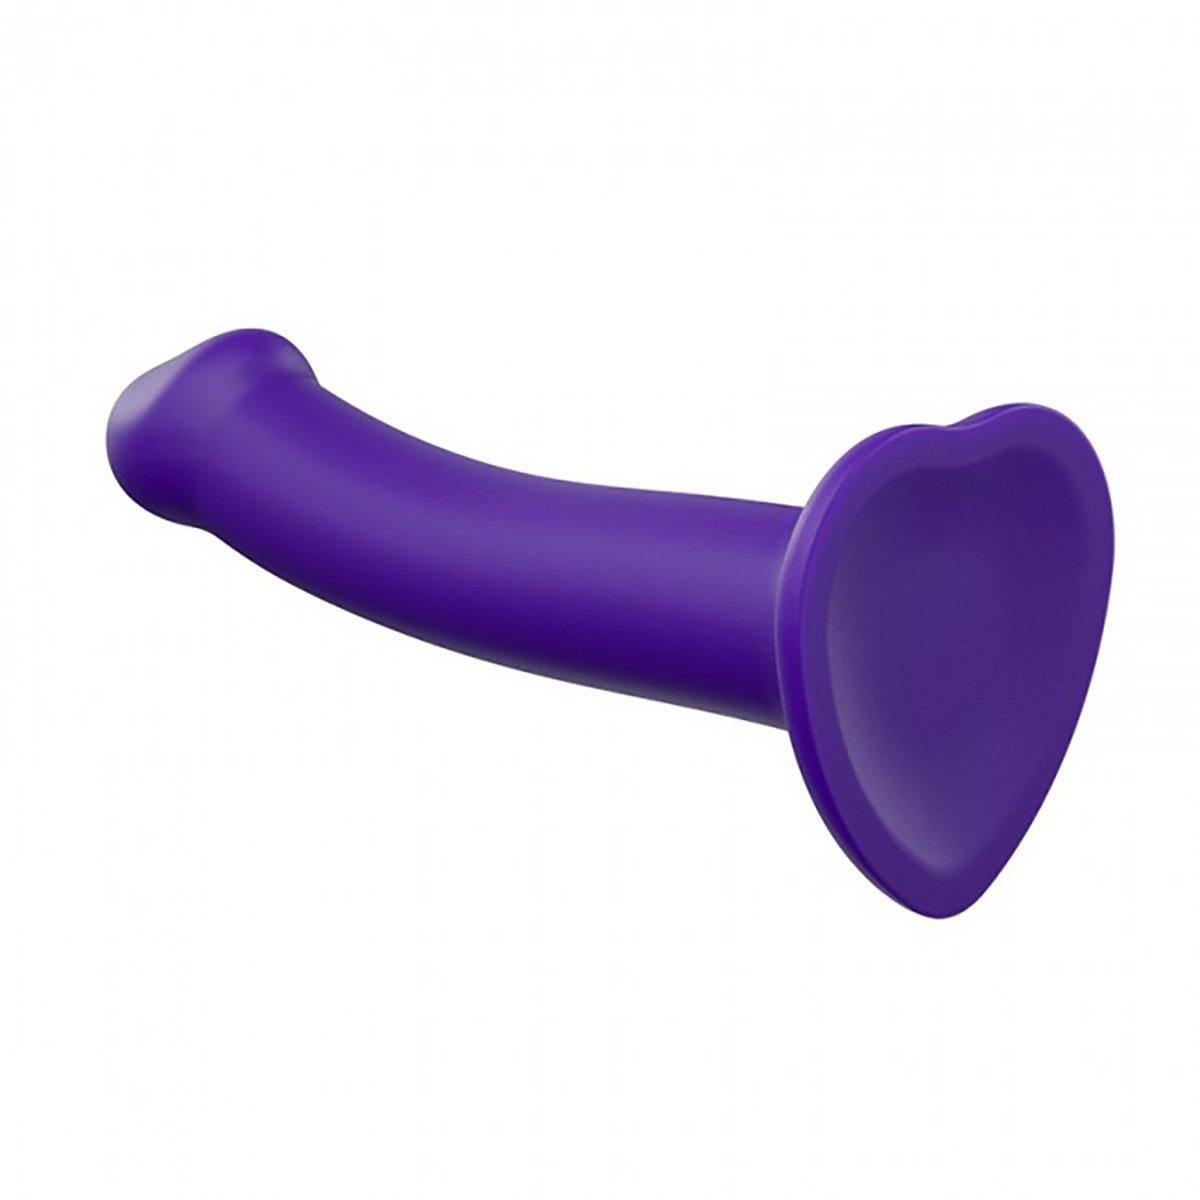 Strap-on-Me Bendable Dual Density Semi-Realistic Dil Purple Large - Buy At Luxury Toy X - Free 3-Day Shipping